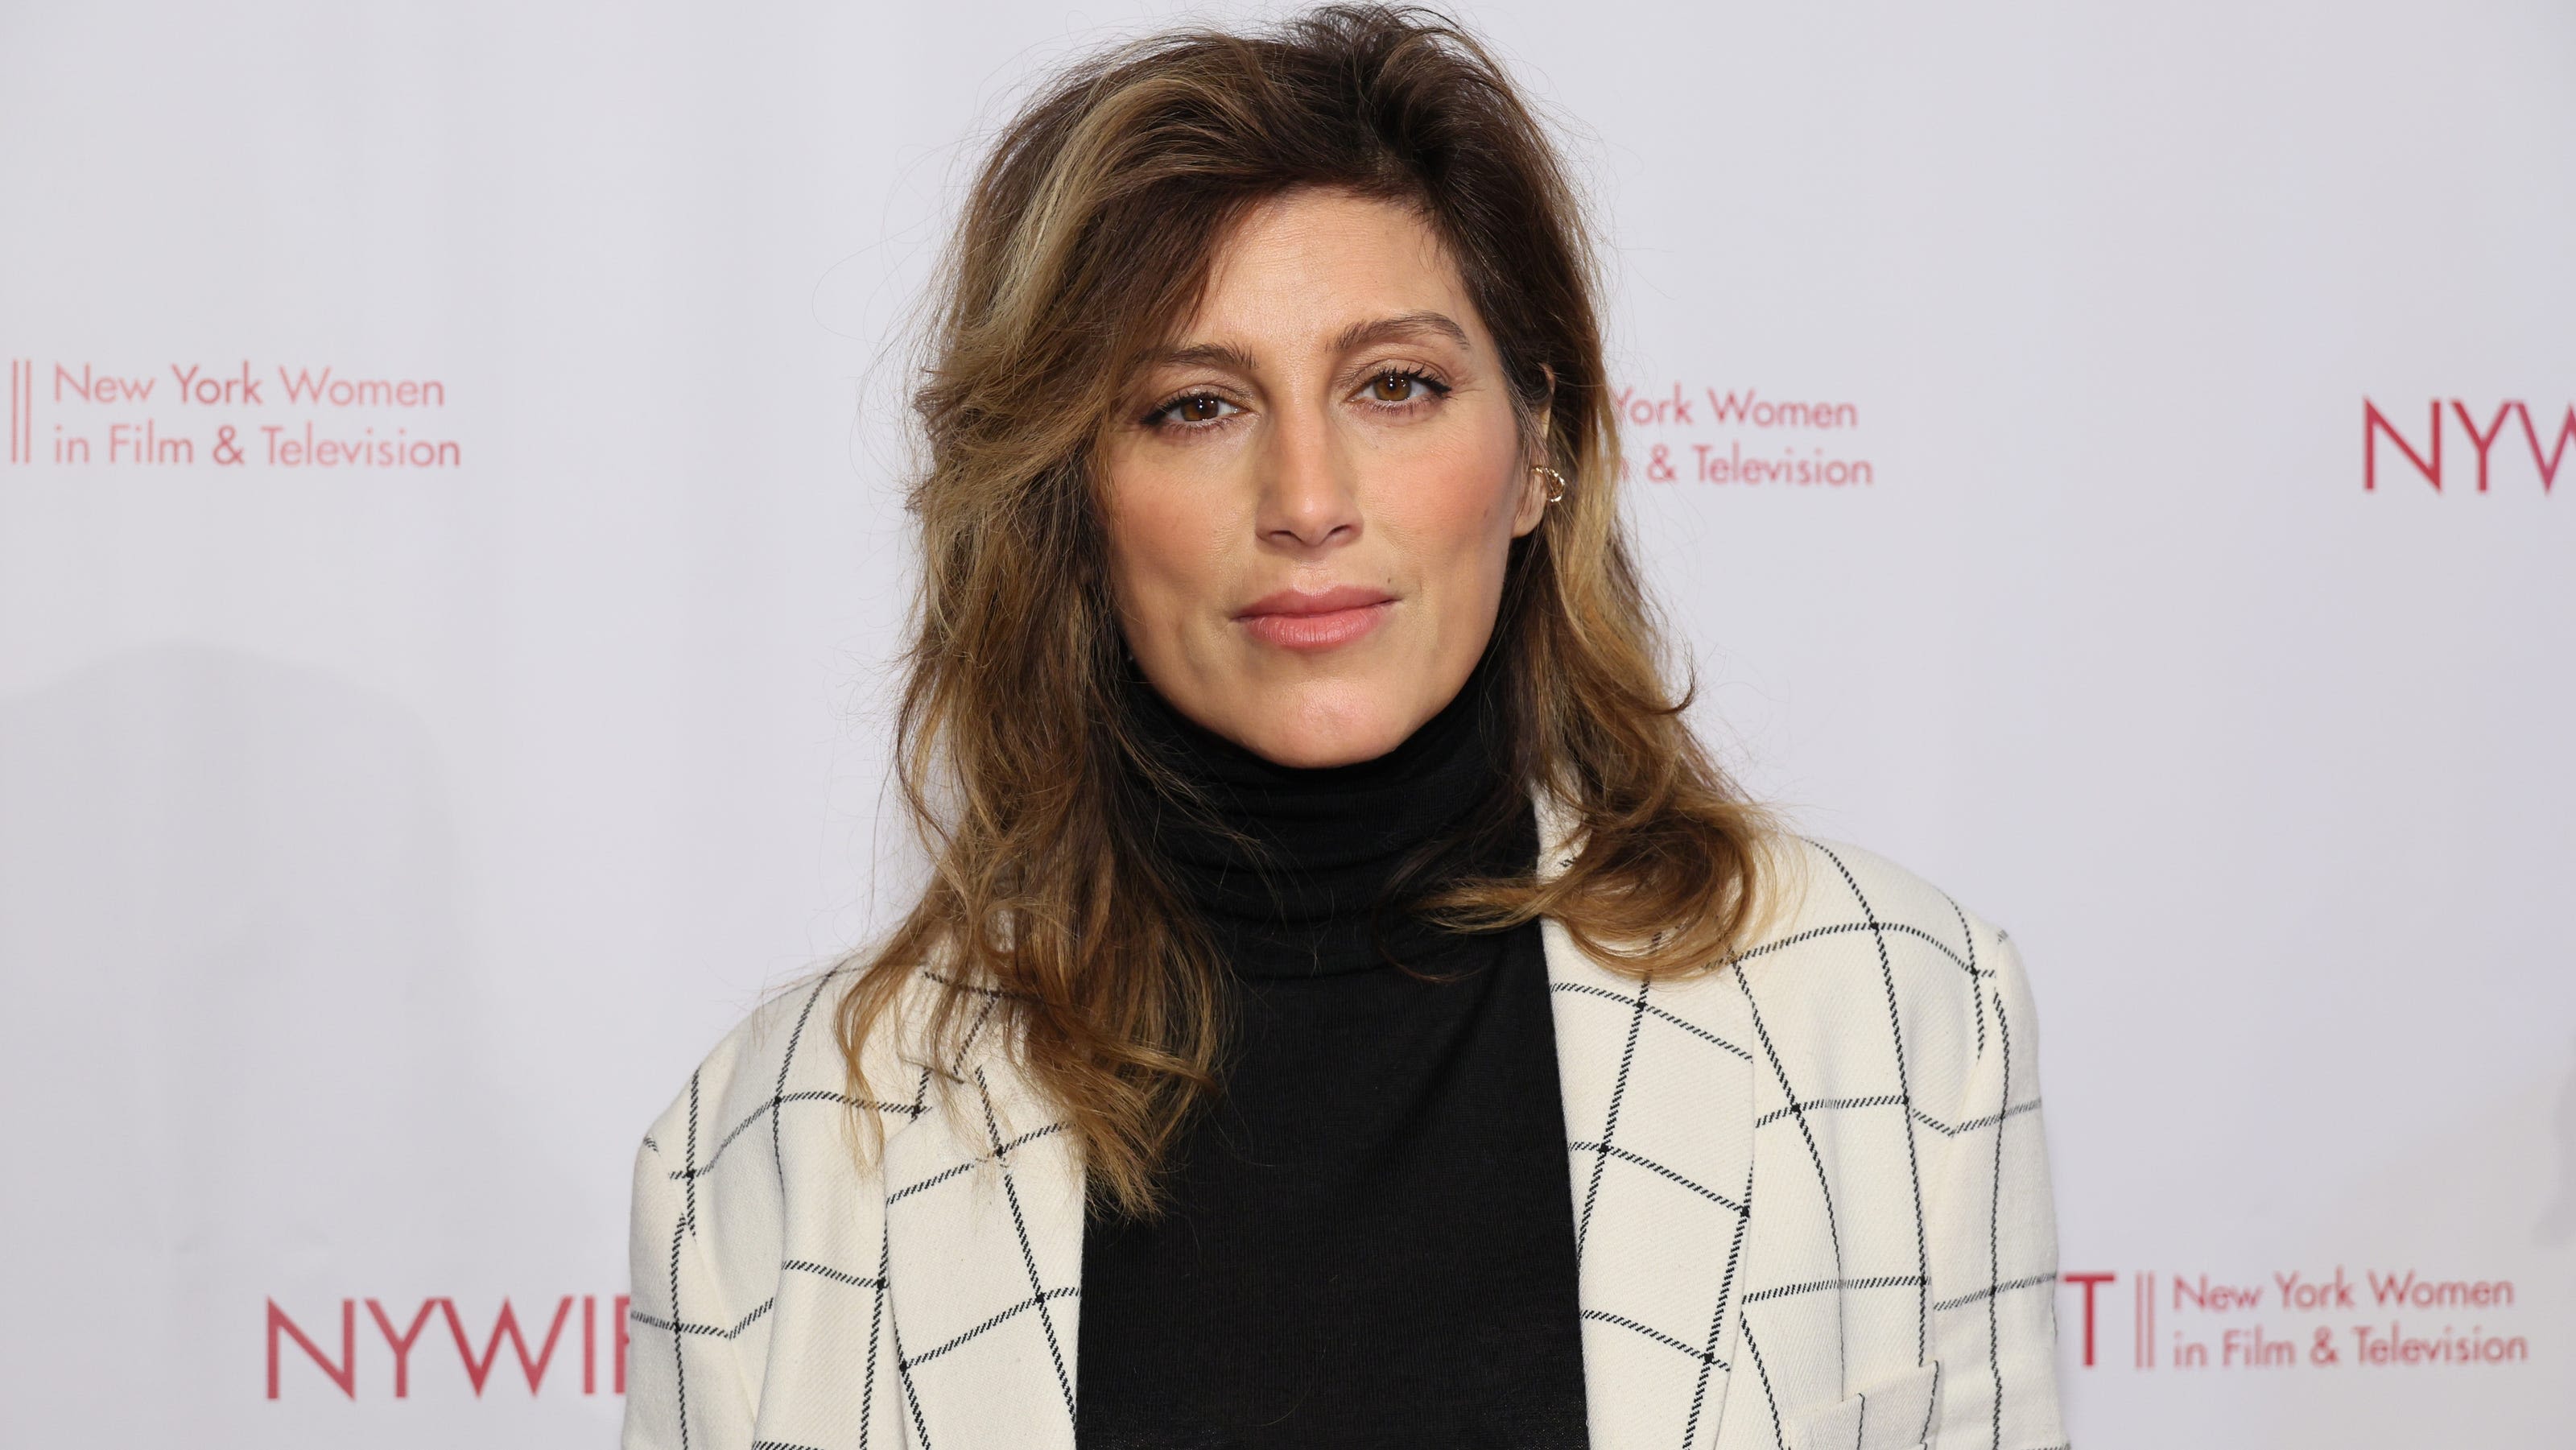 Jennifer Esposito says 'Harvey Weinstein-esque' producer tried to 'completely end' her career